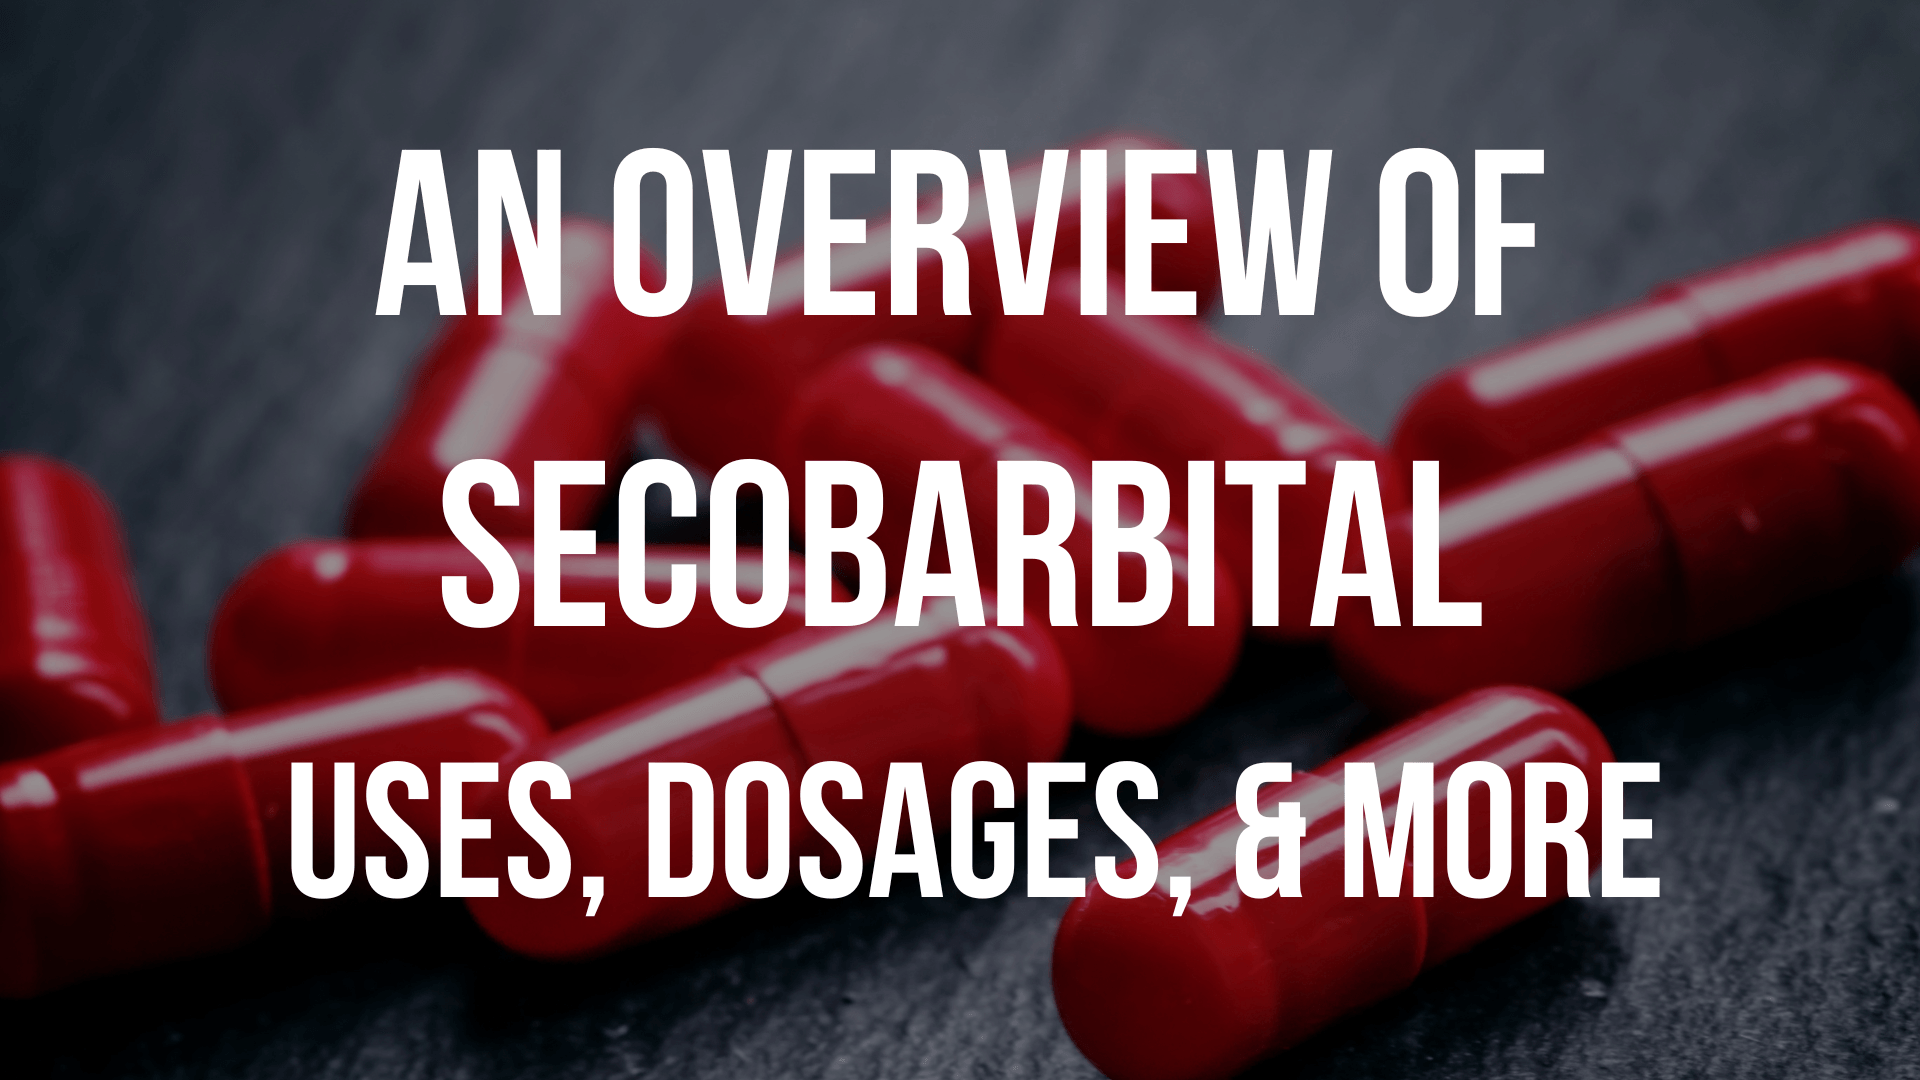 An Overview of Secobarbital: Uses, Dosages, & More